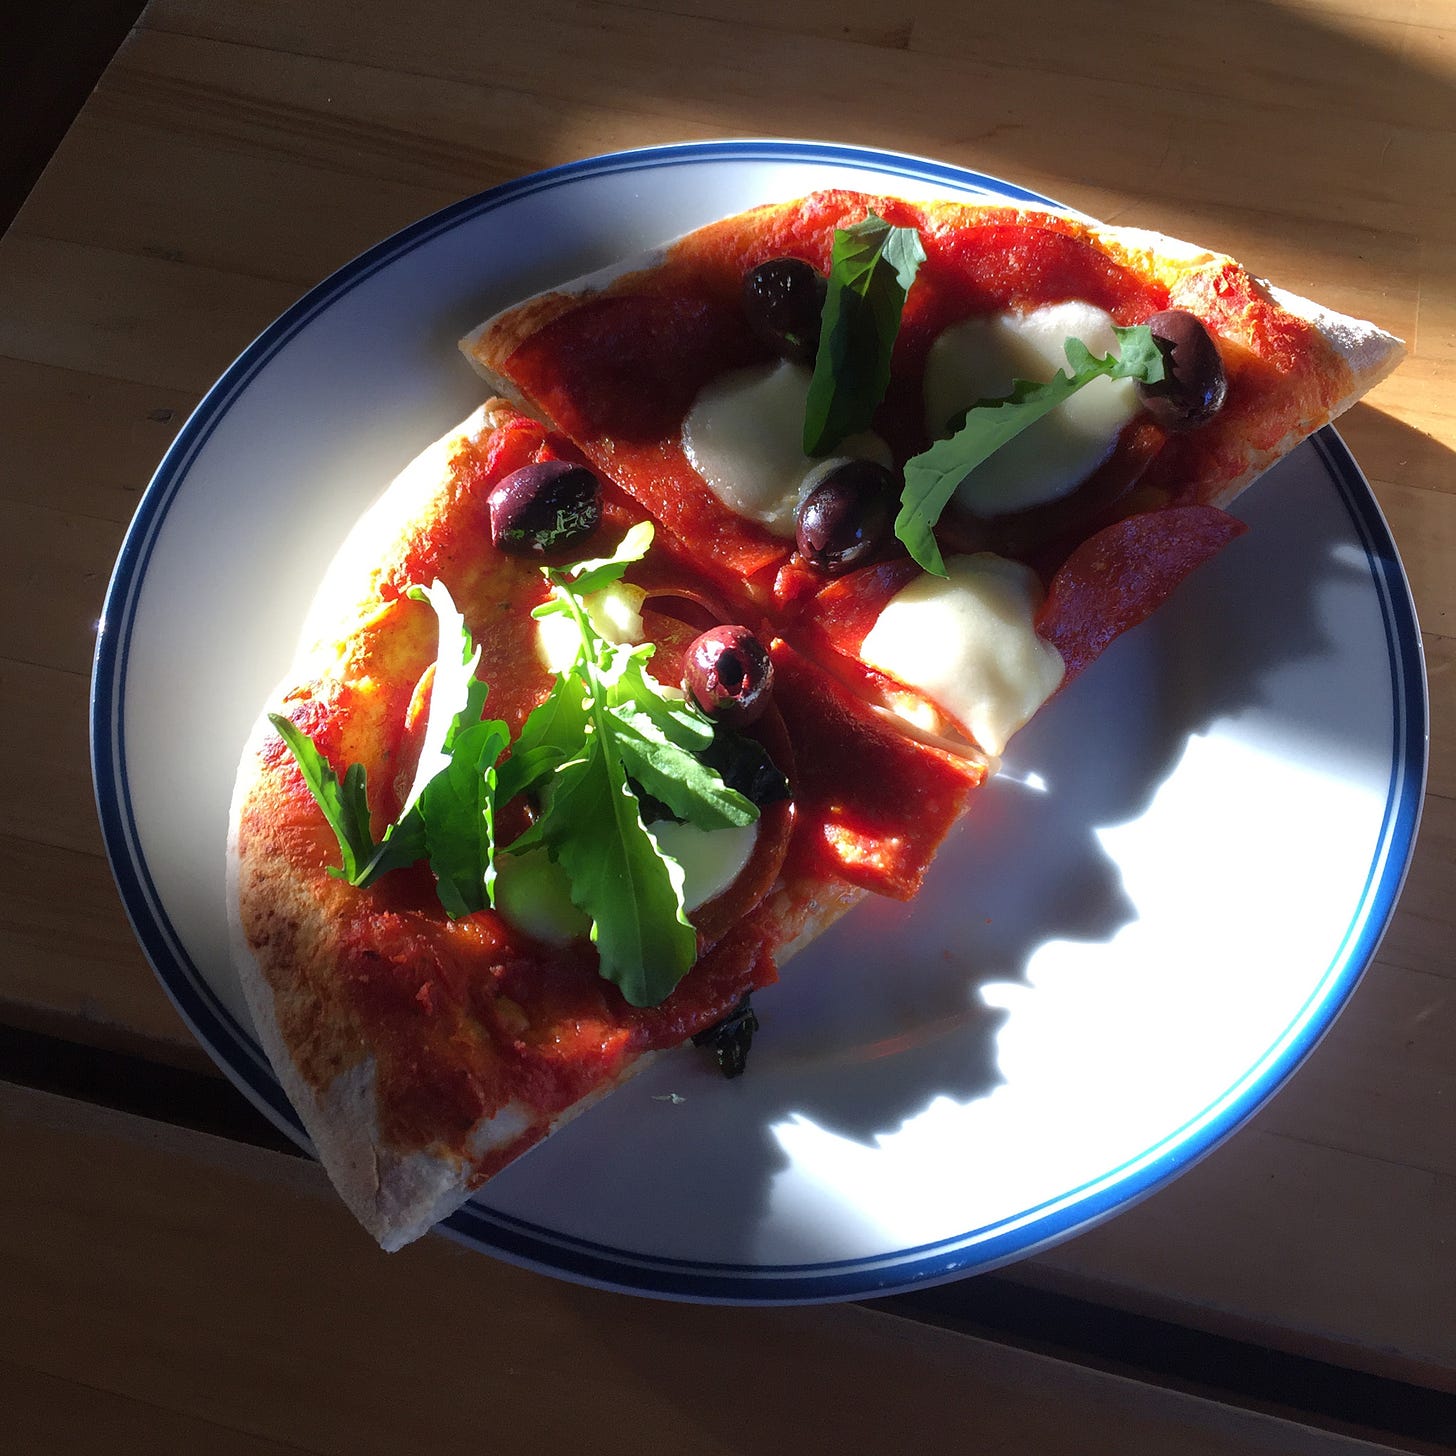 two slices of pizza with salami, kalamata olives, and slices of bocconcini with fresh arugula on top. They sit on a white plate, and dappled light from a window creates shadows across the plate and table.